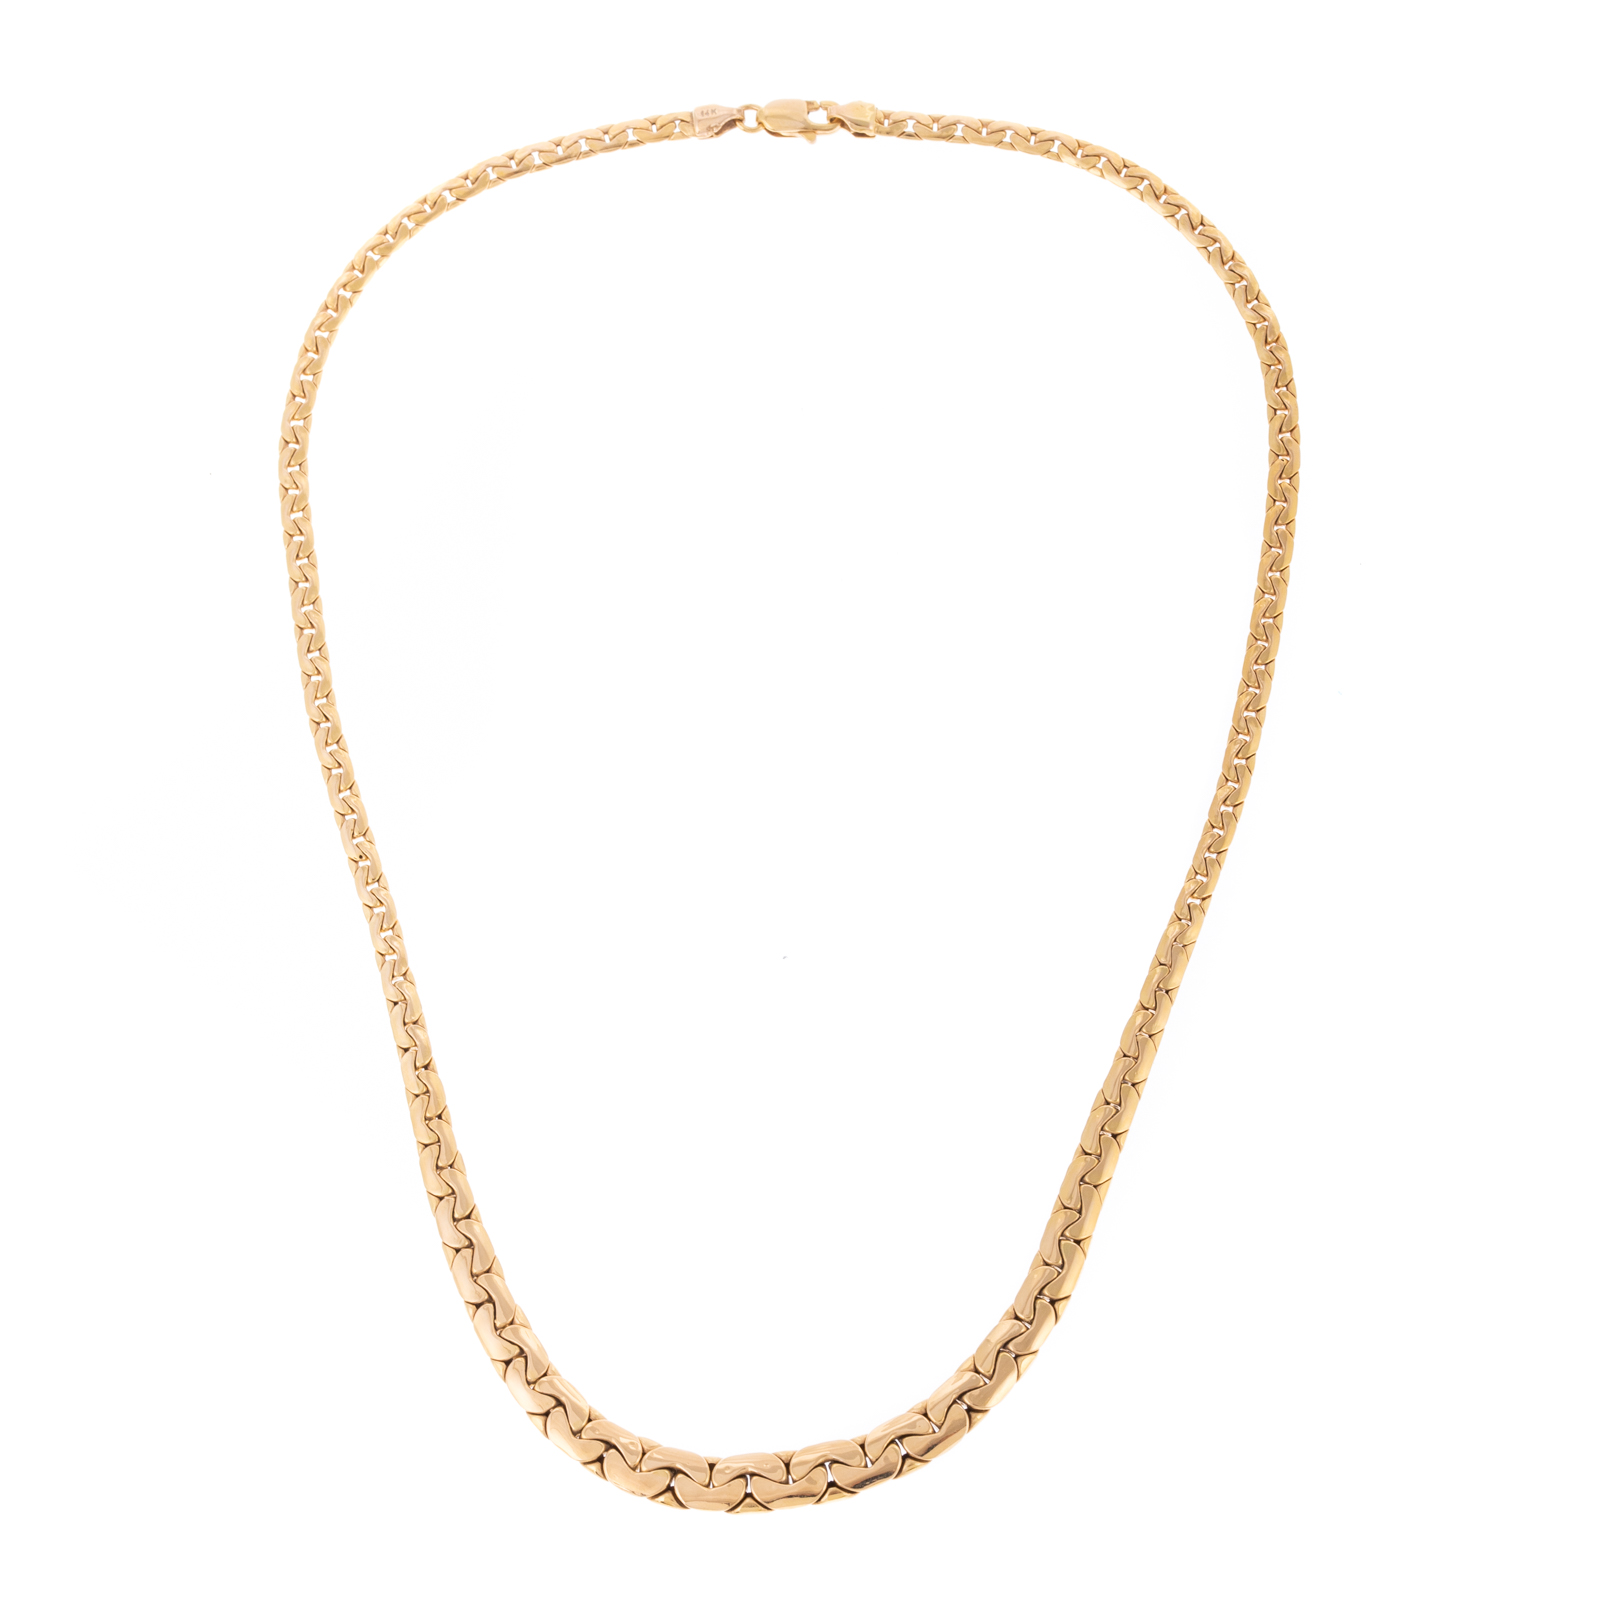 A 14K YELLOW GOLD C LINK GRADUATED